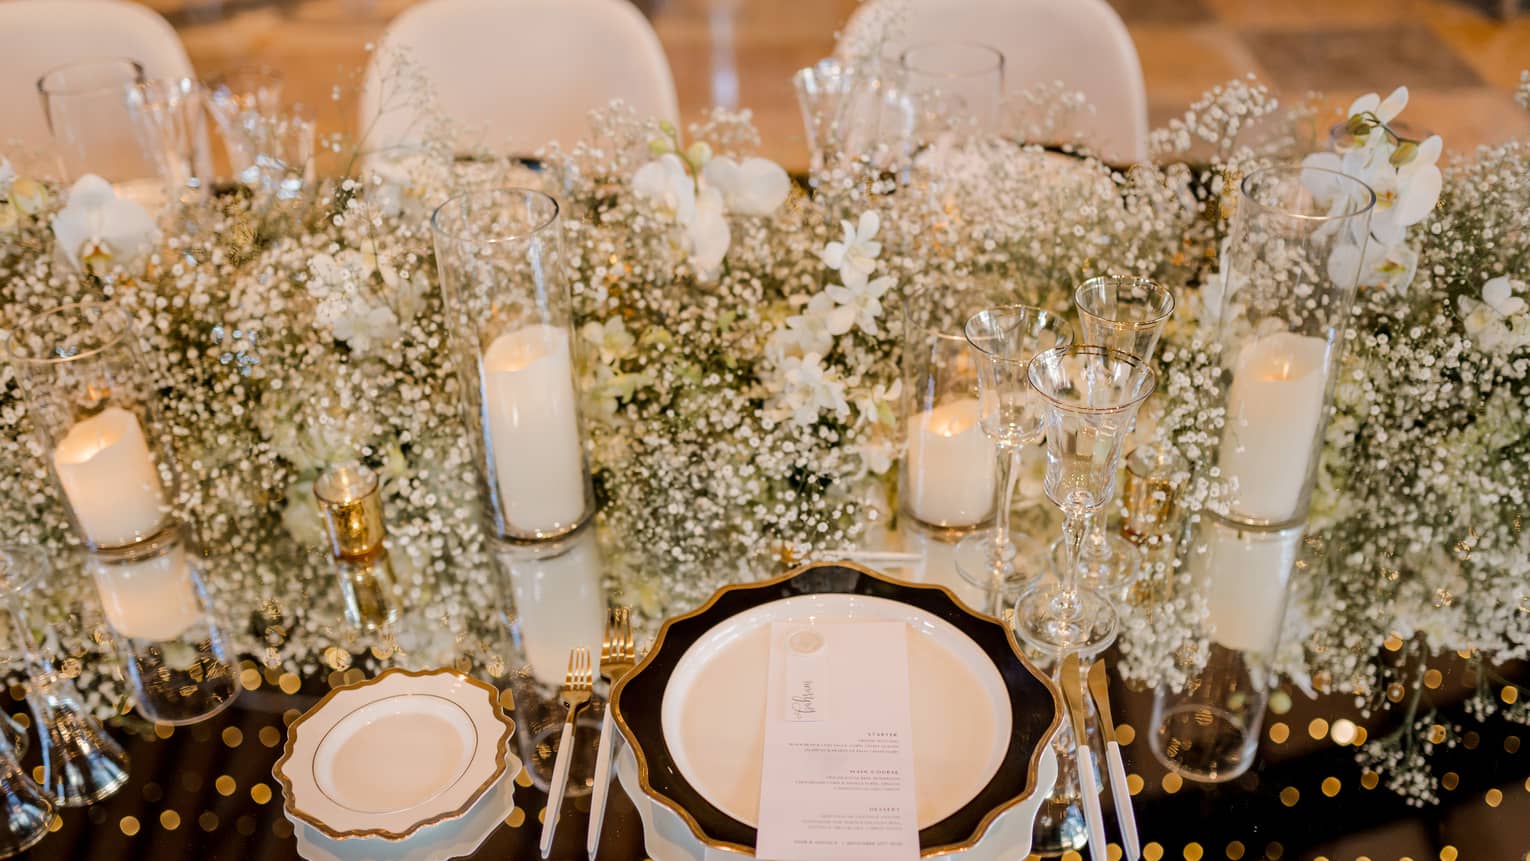 Closeup of table set for wedding reception with white flowers, candles, chair covers and dishes